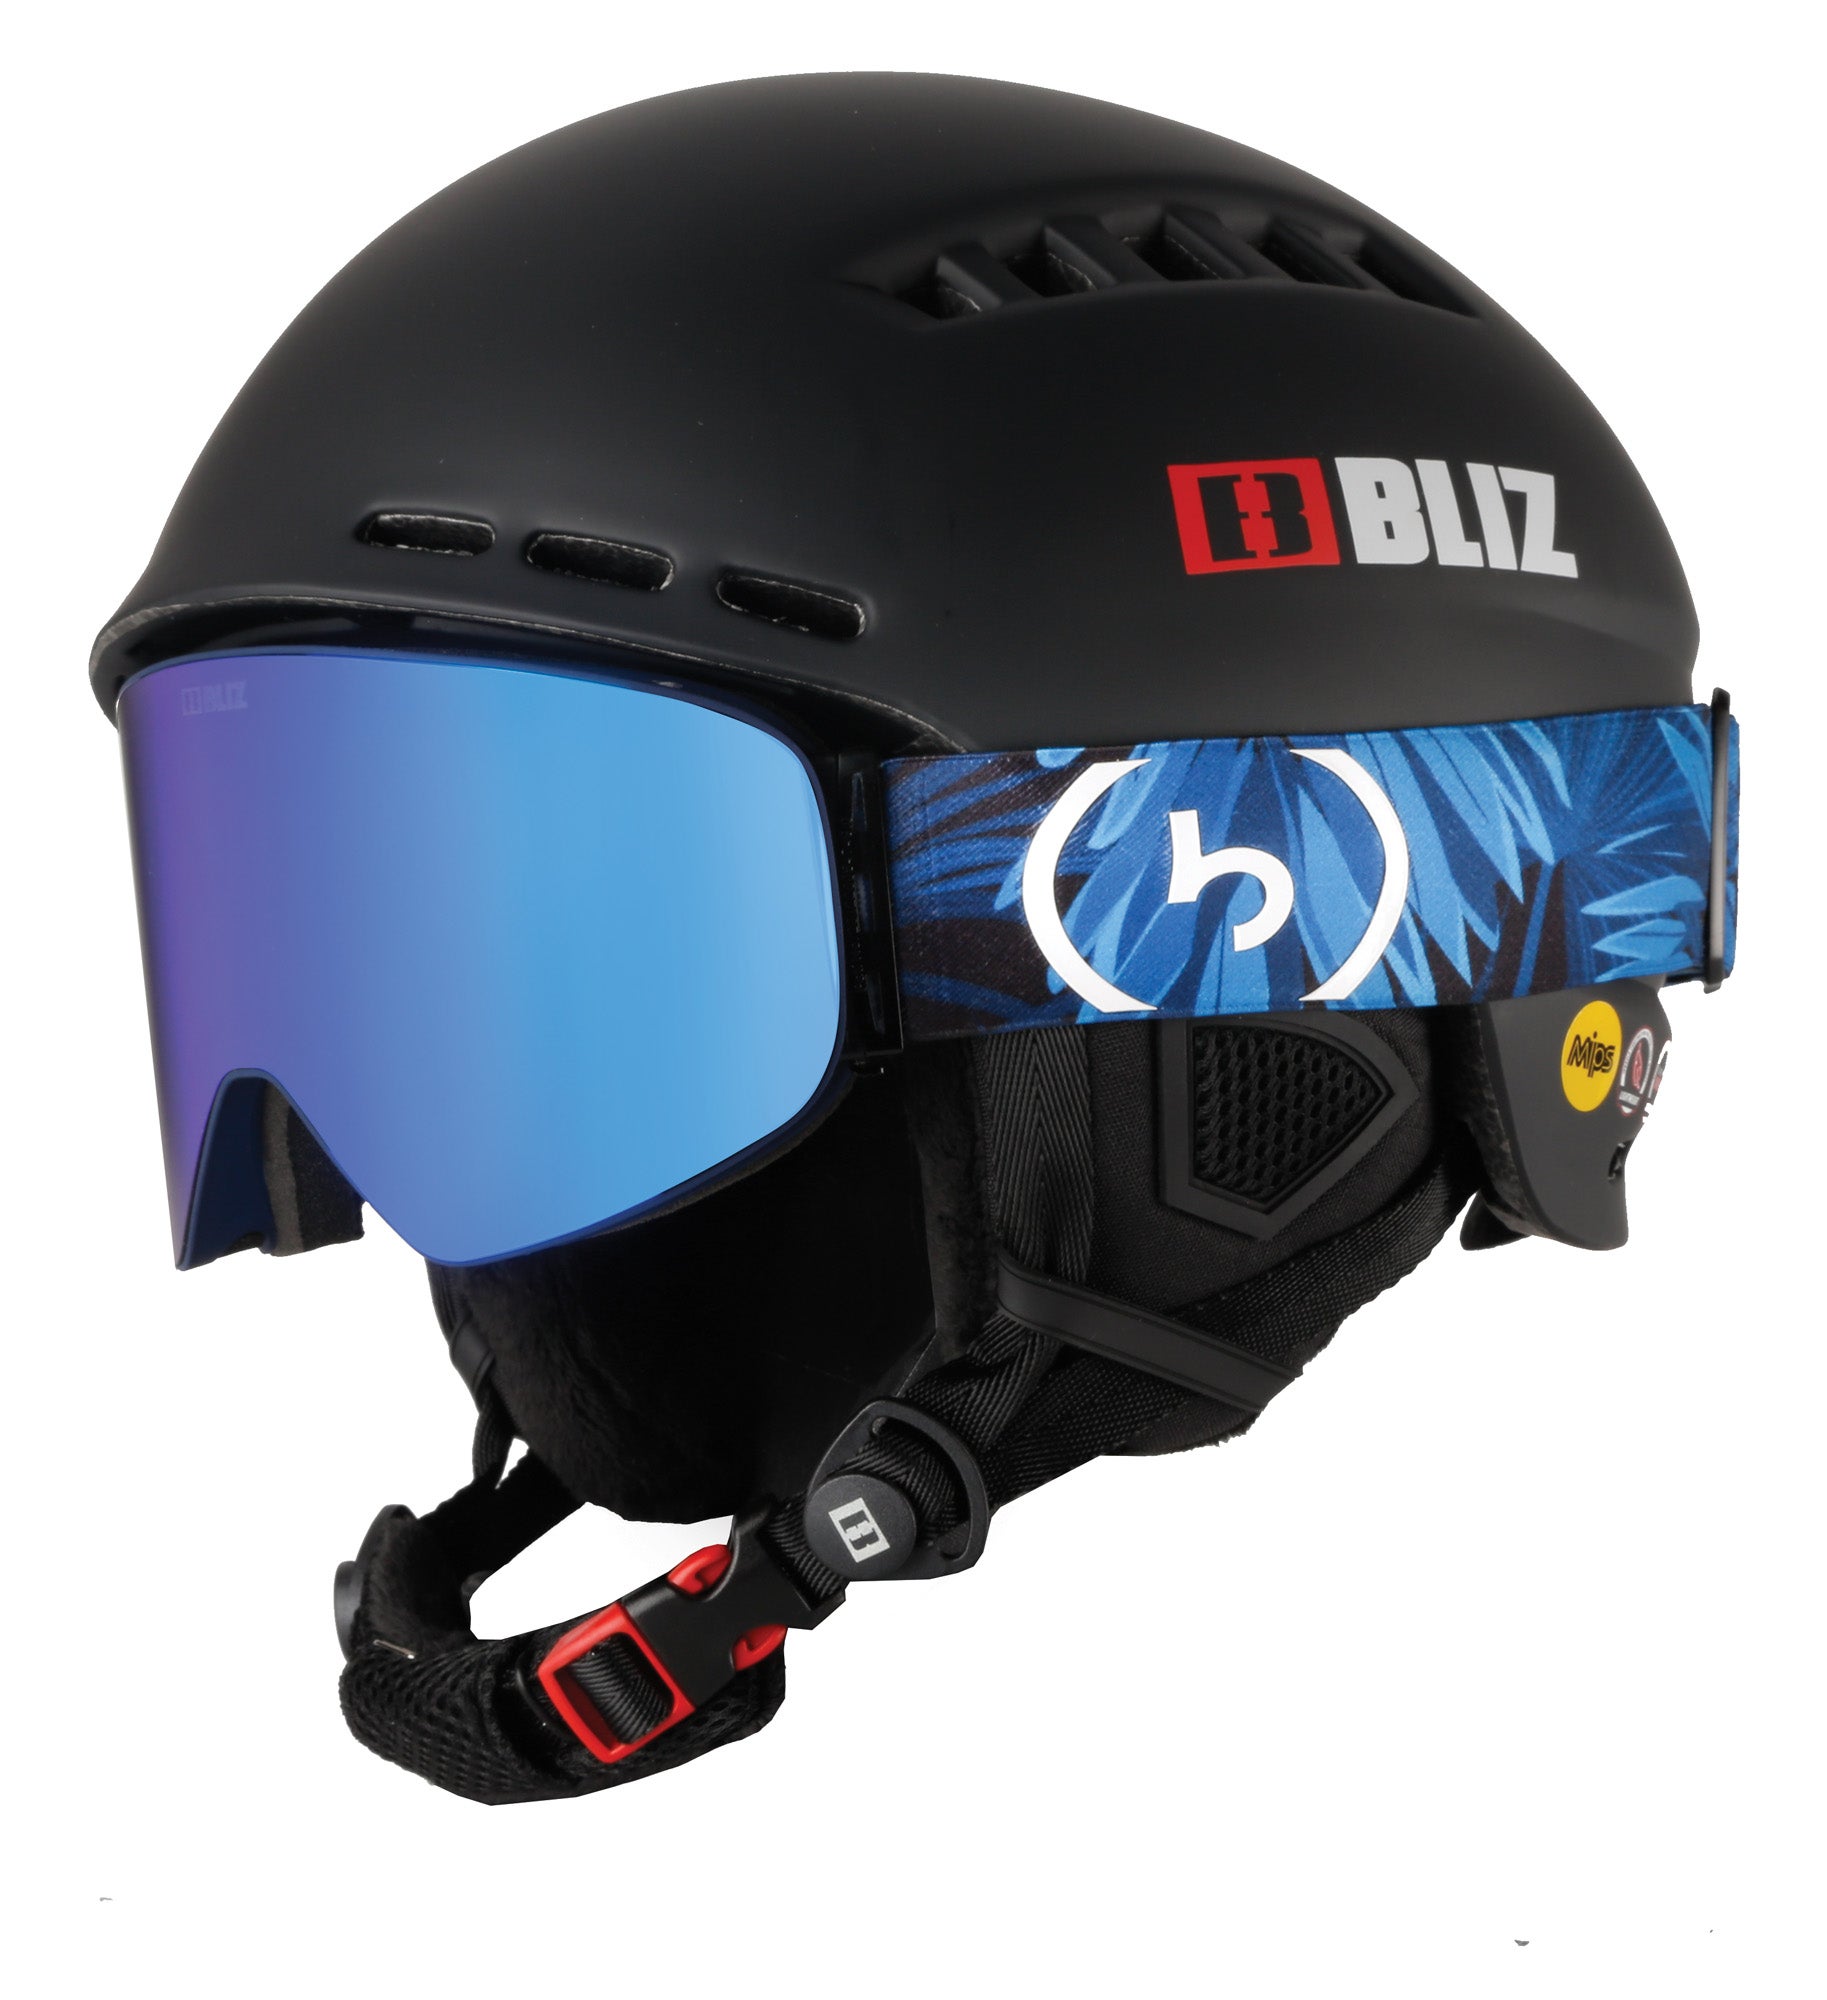 Bliz Head Cover MIPS Helmet and Flow Goggle